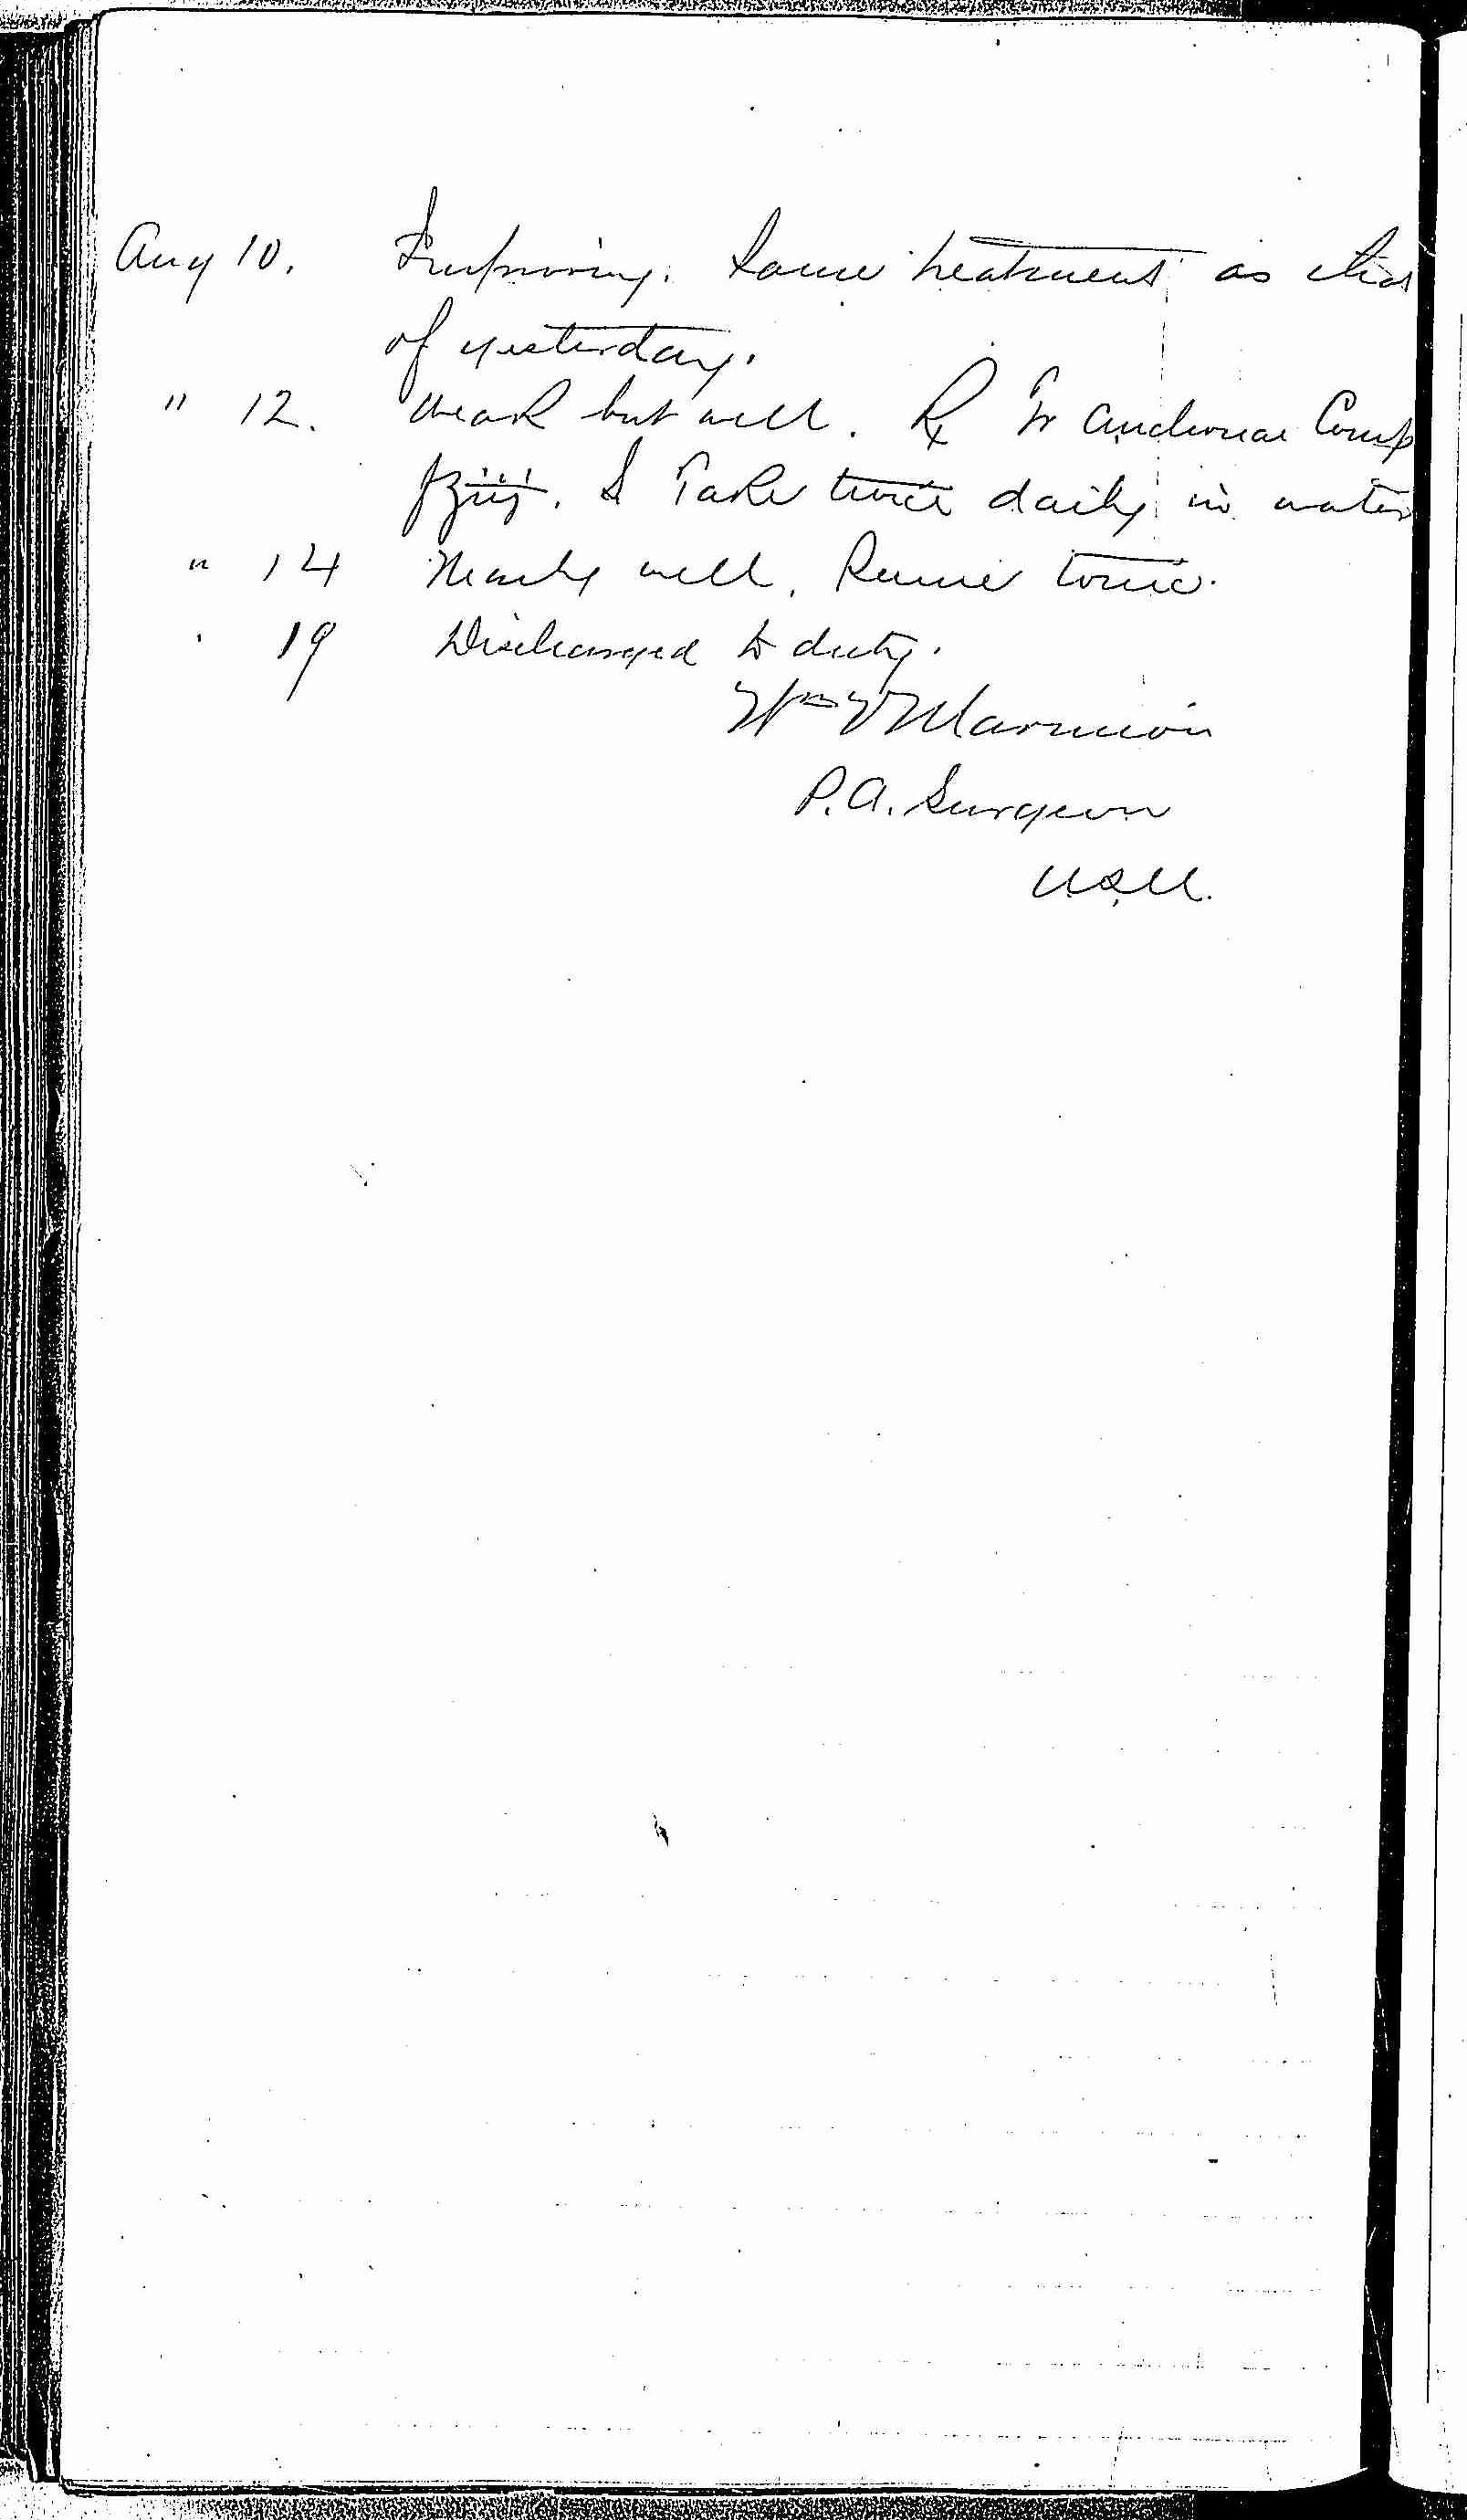 Entry for William Laurence (page 2 of 2) in the log Hospital Tickets and Case Papers - Naval Hospital - Washington, D.C. - 1868-69